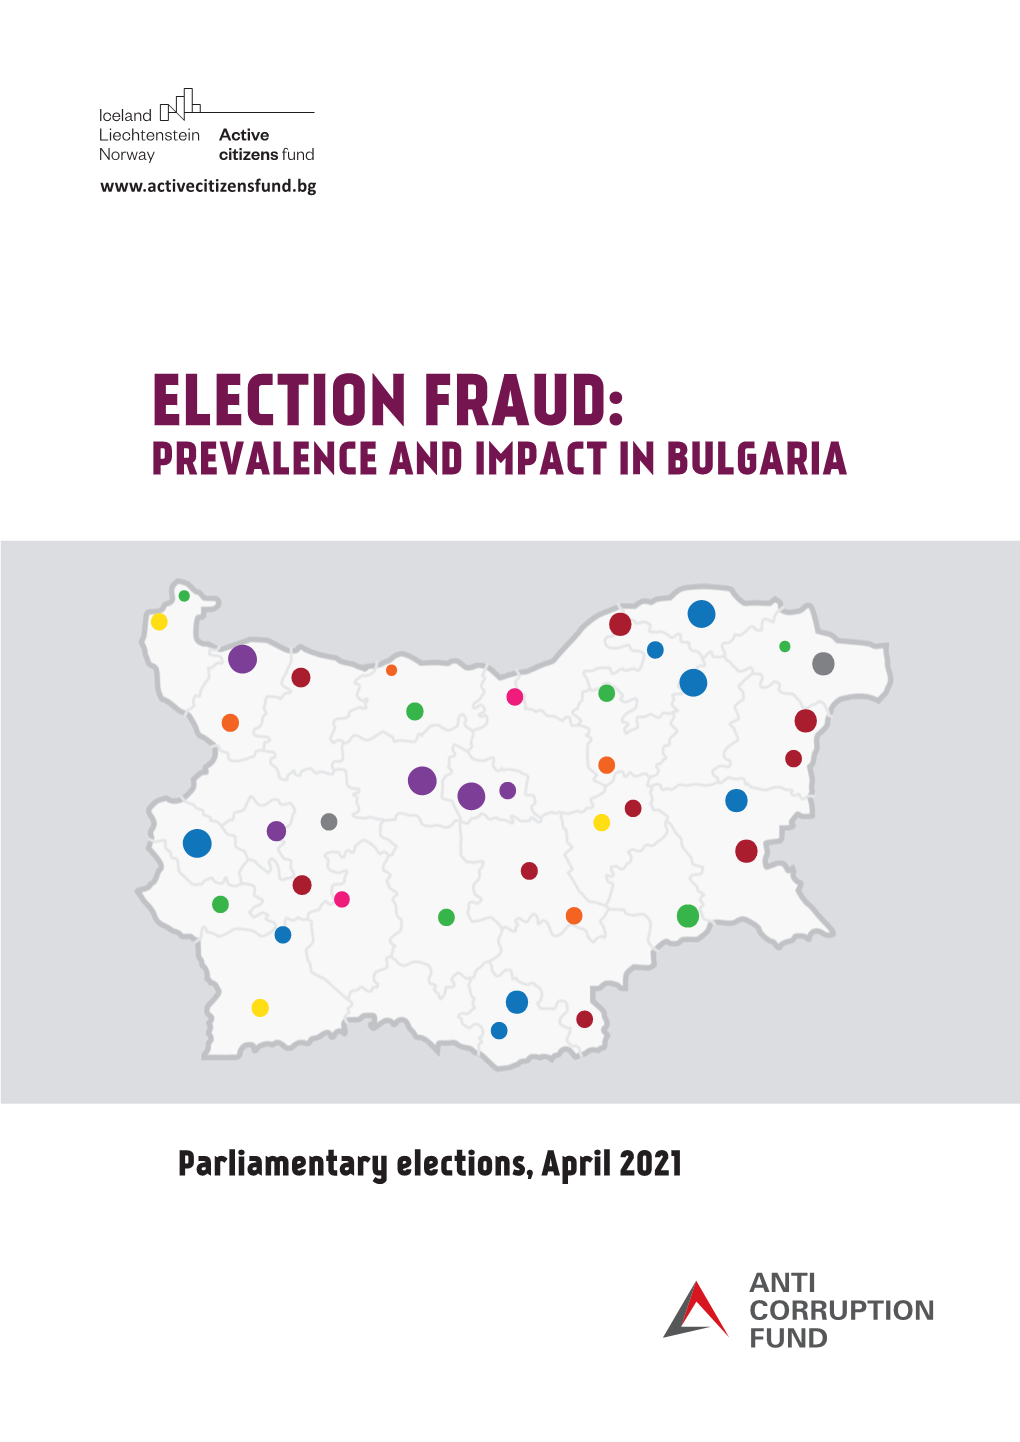 Election Fraud: Prevalence and Impact in Bulgaria